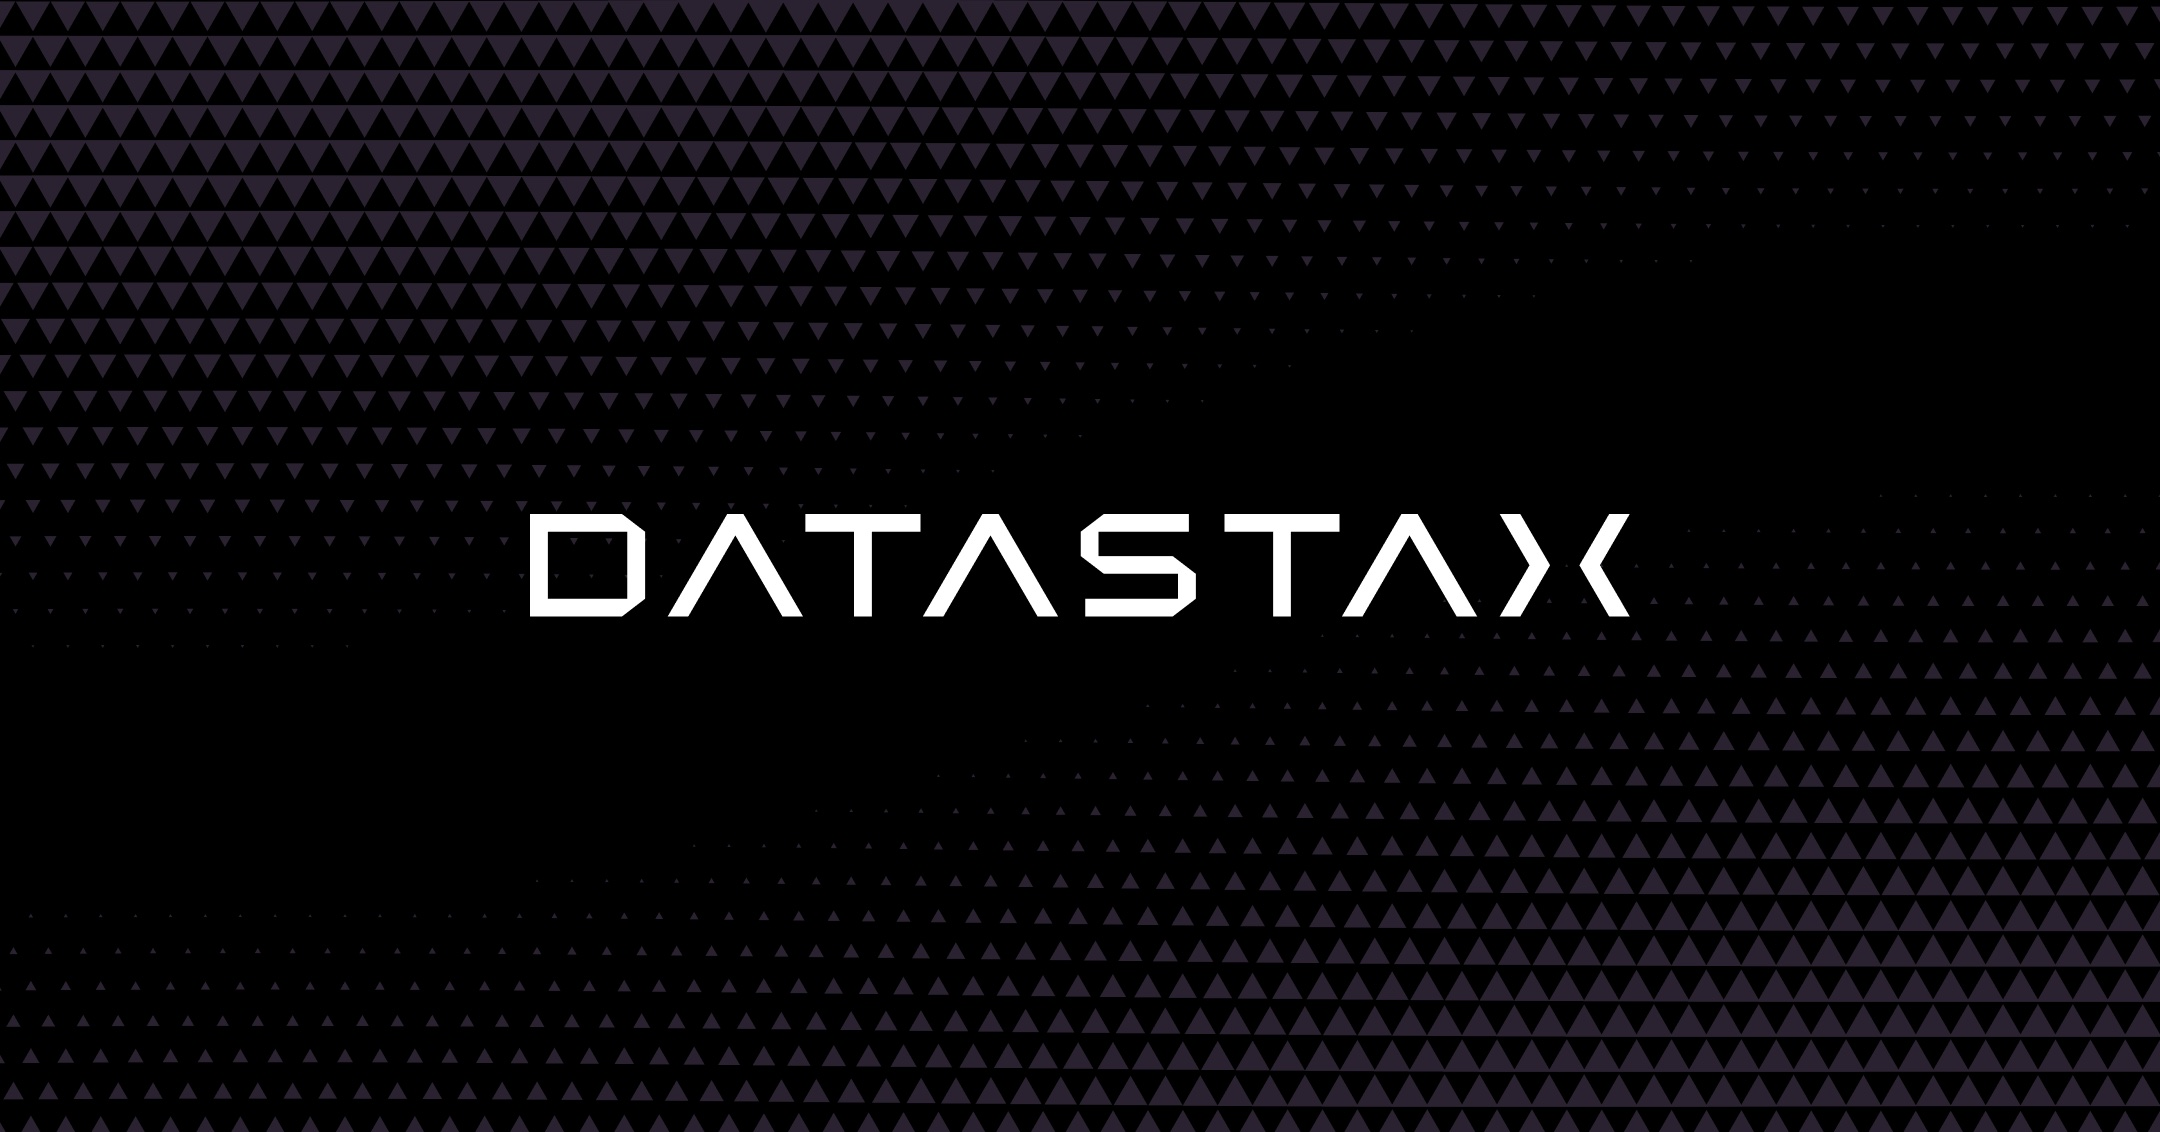 Priceline Bolsters Its Bookings with Big Data and DataStax